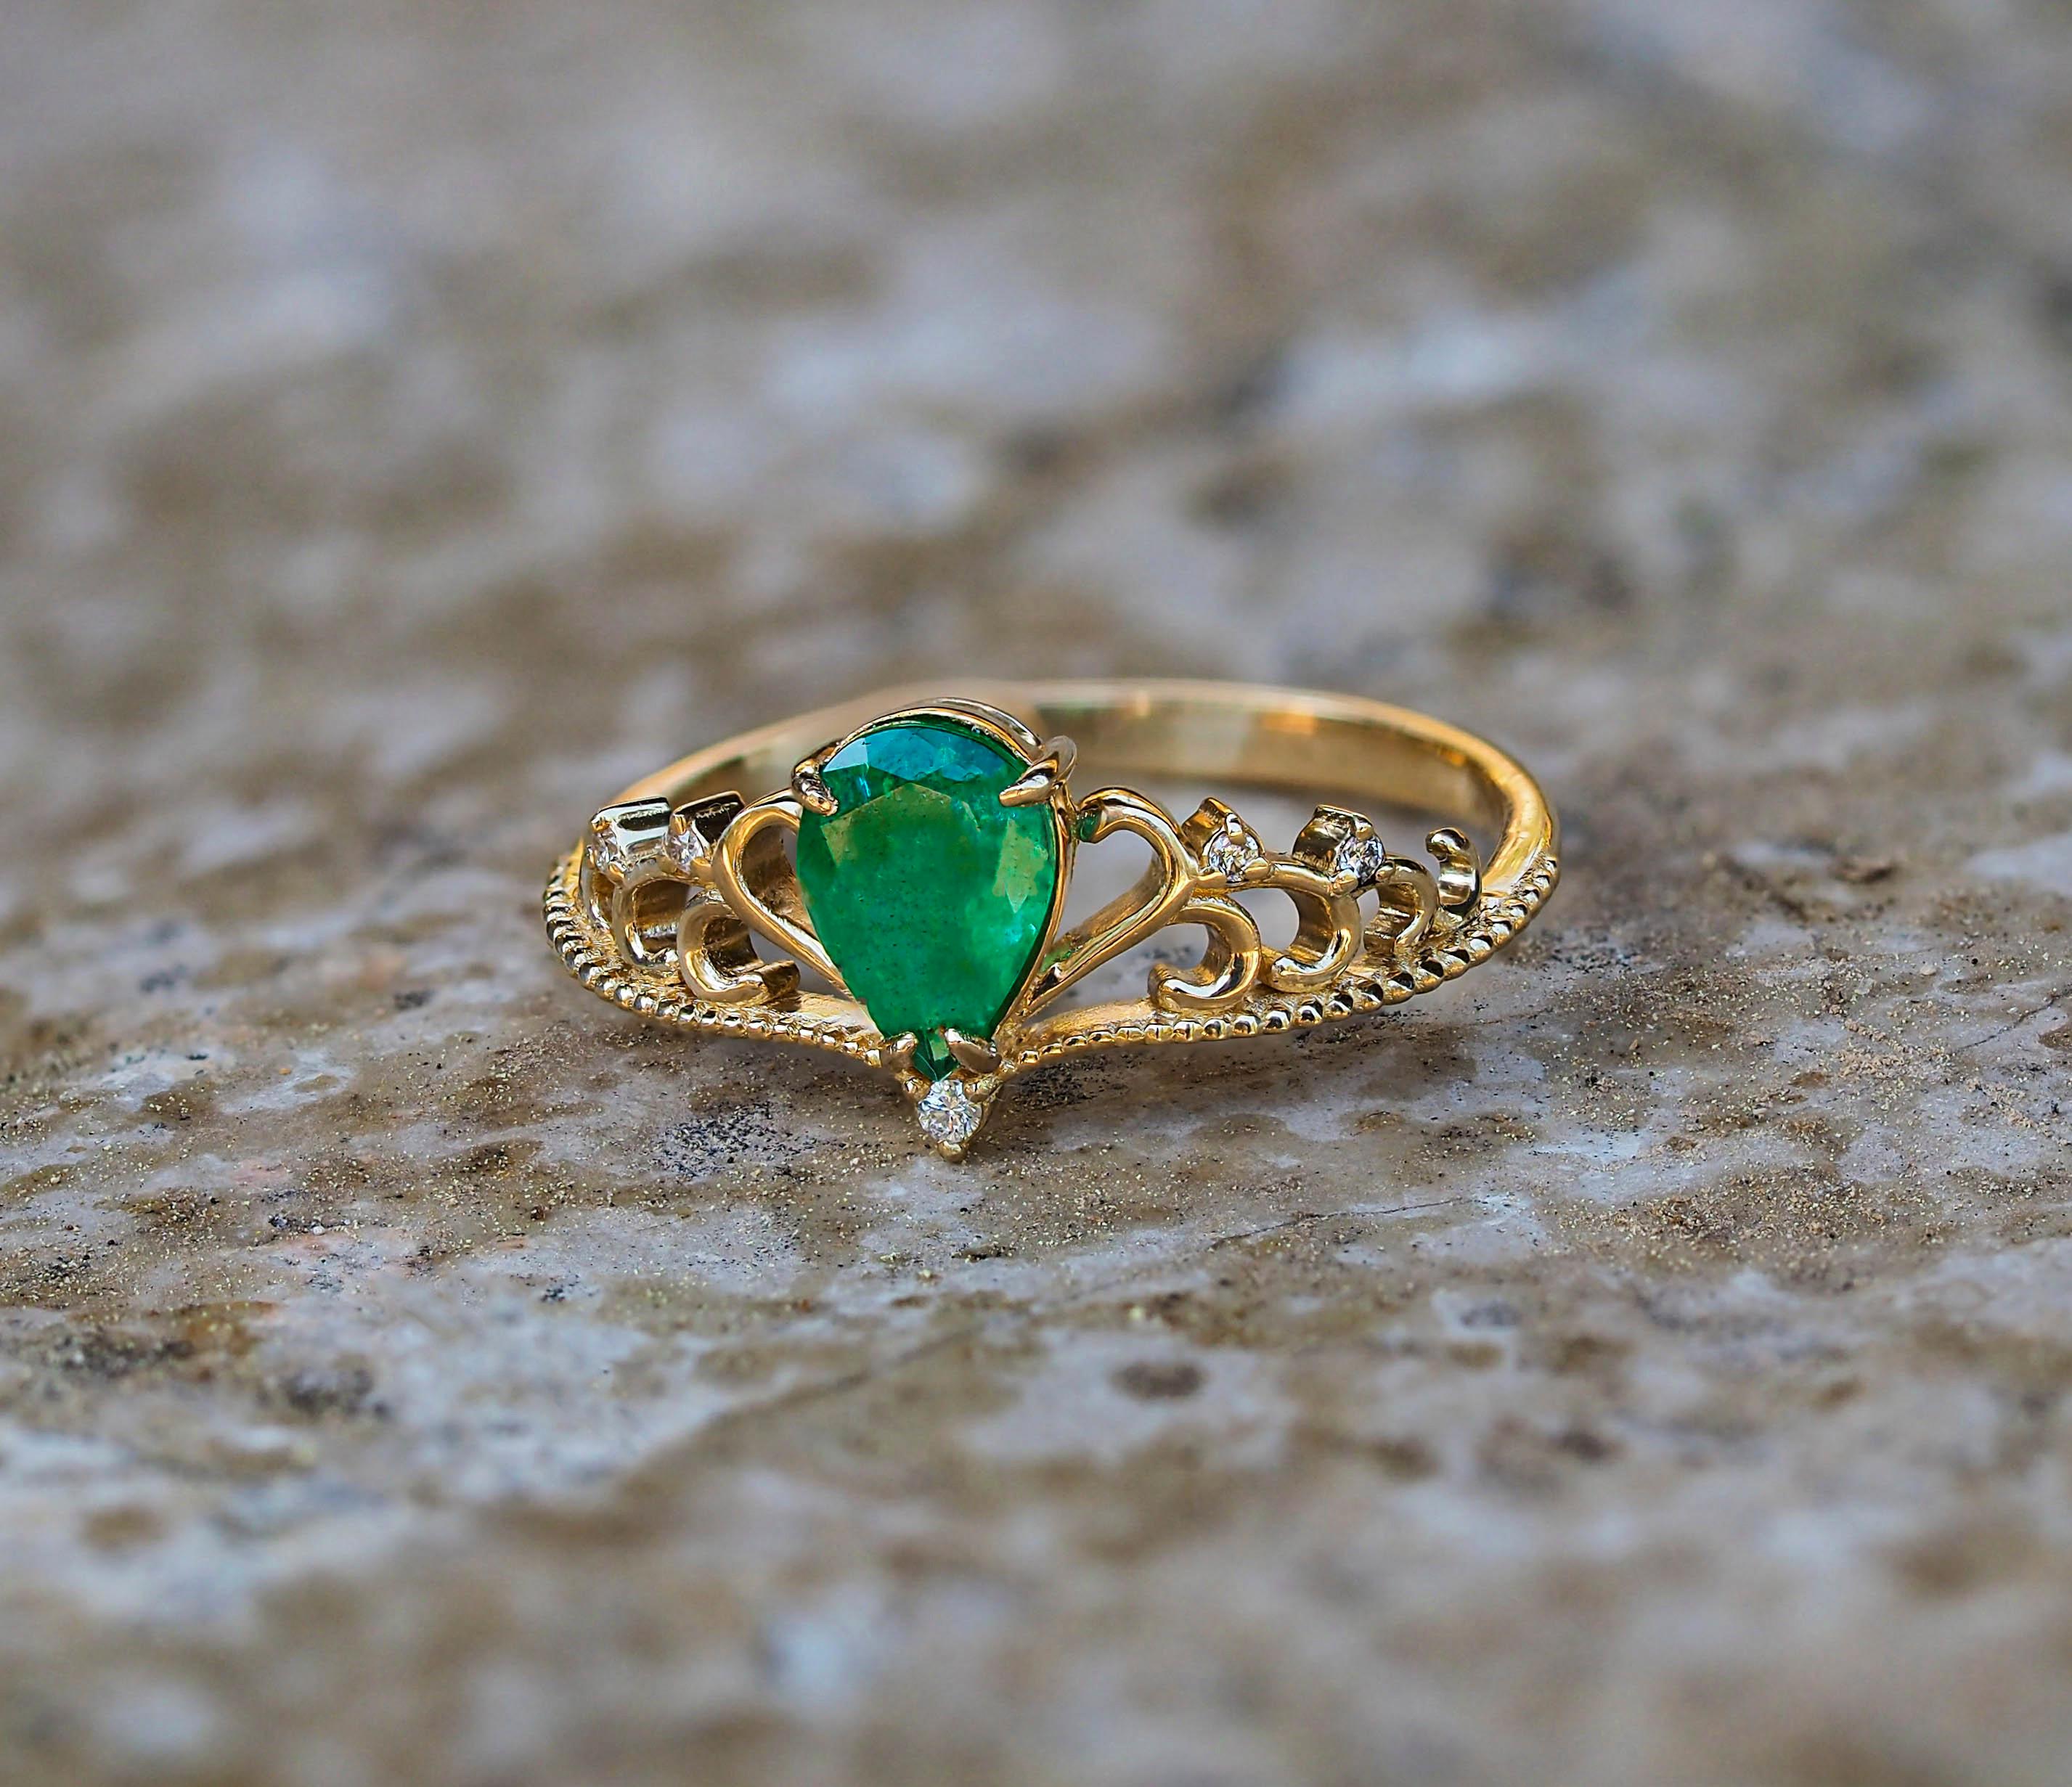 For Sale:  14k Gold Tiara Ring with Natural Emerald and Diamonds! 4